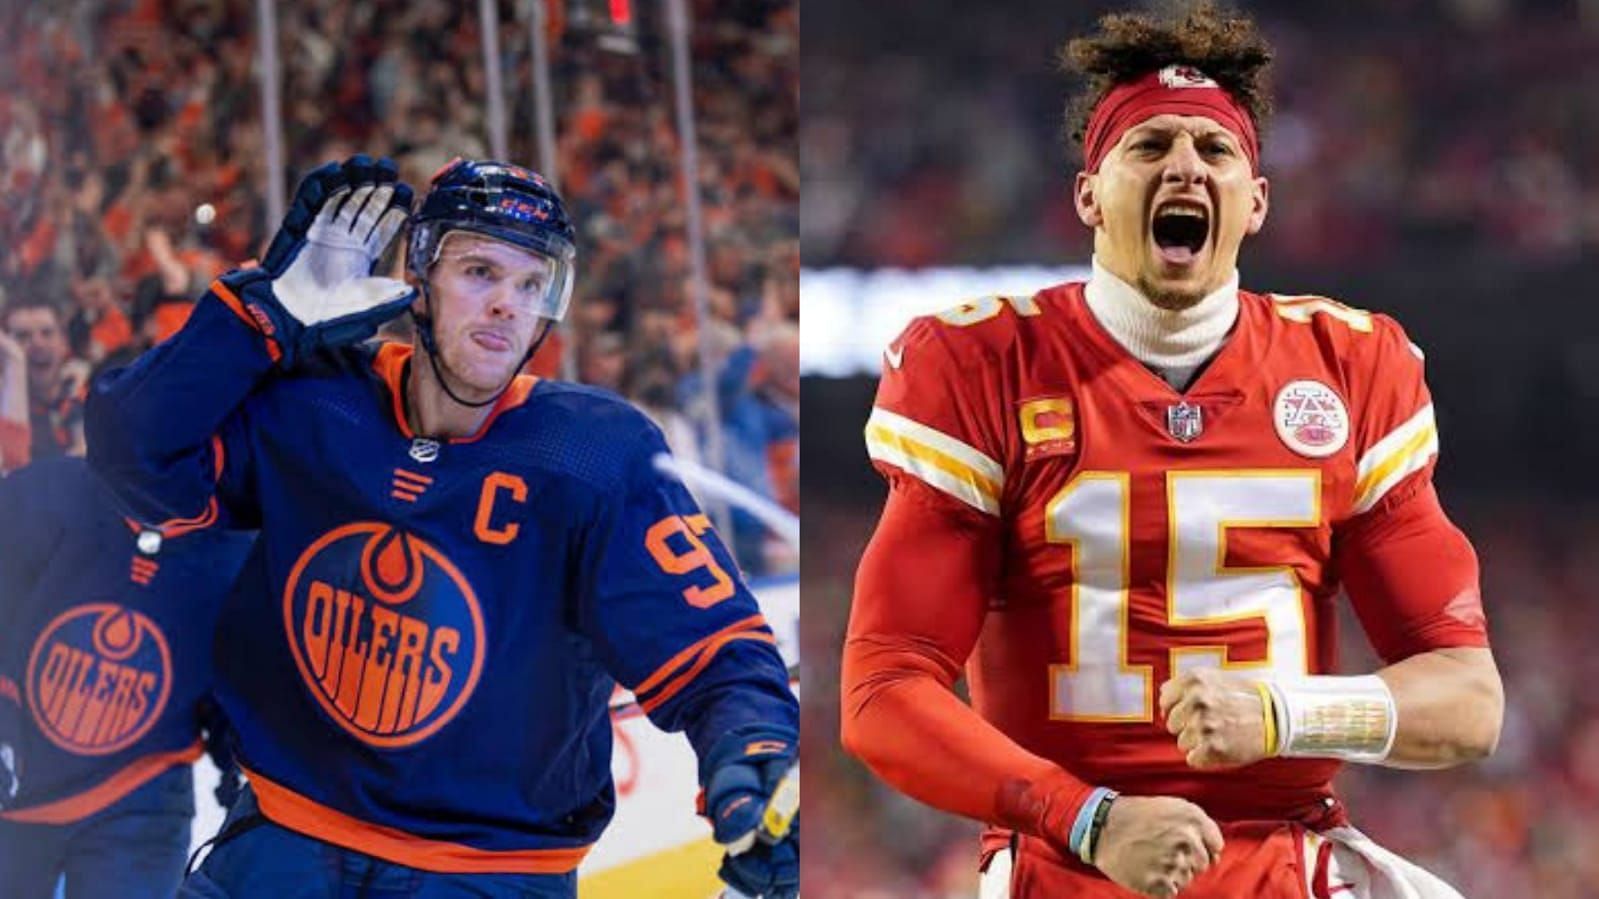 We asked AI to compare active NHL players to current NFL athletes and